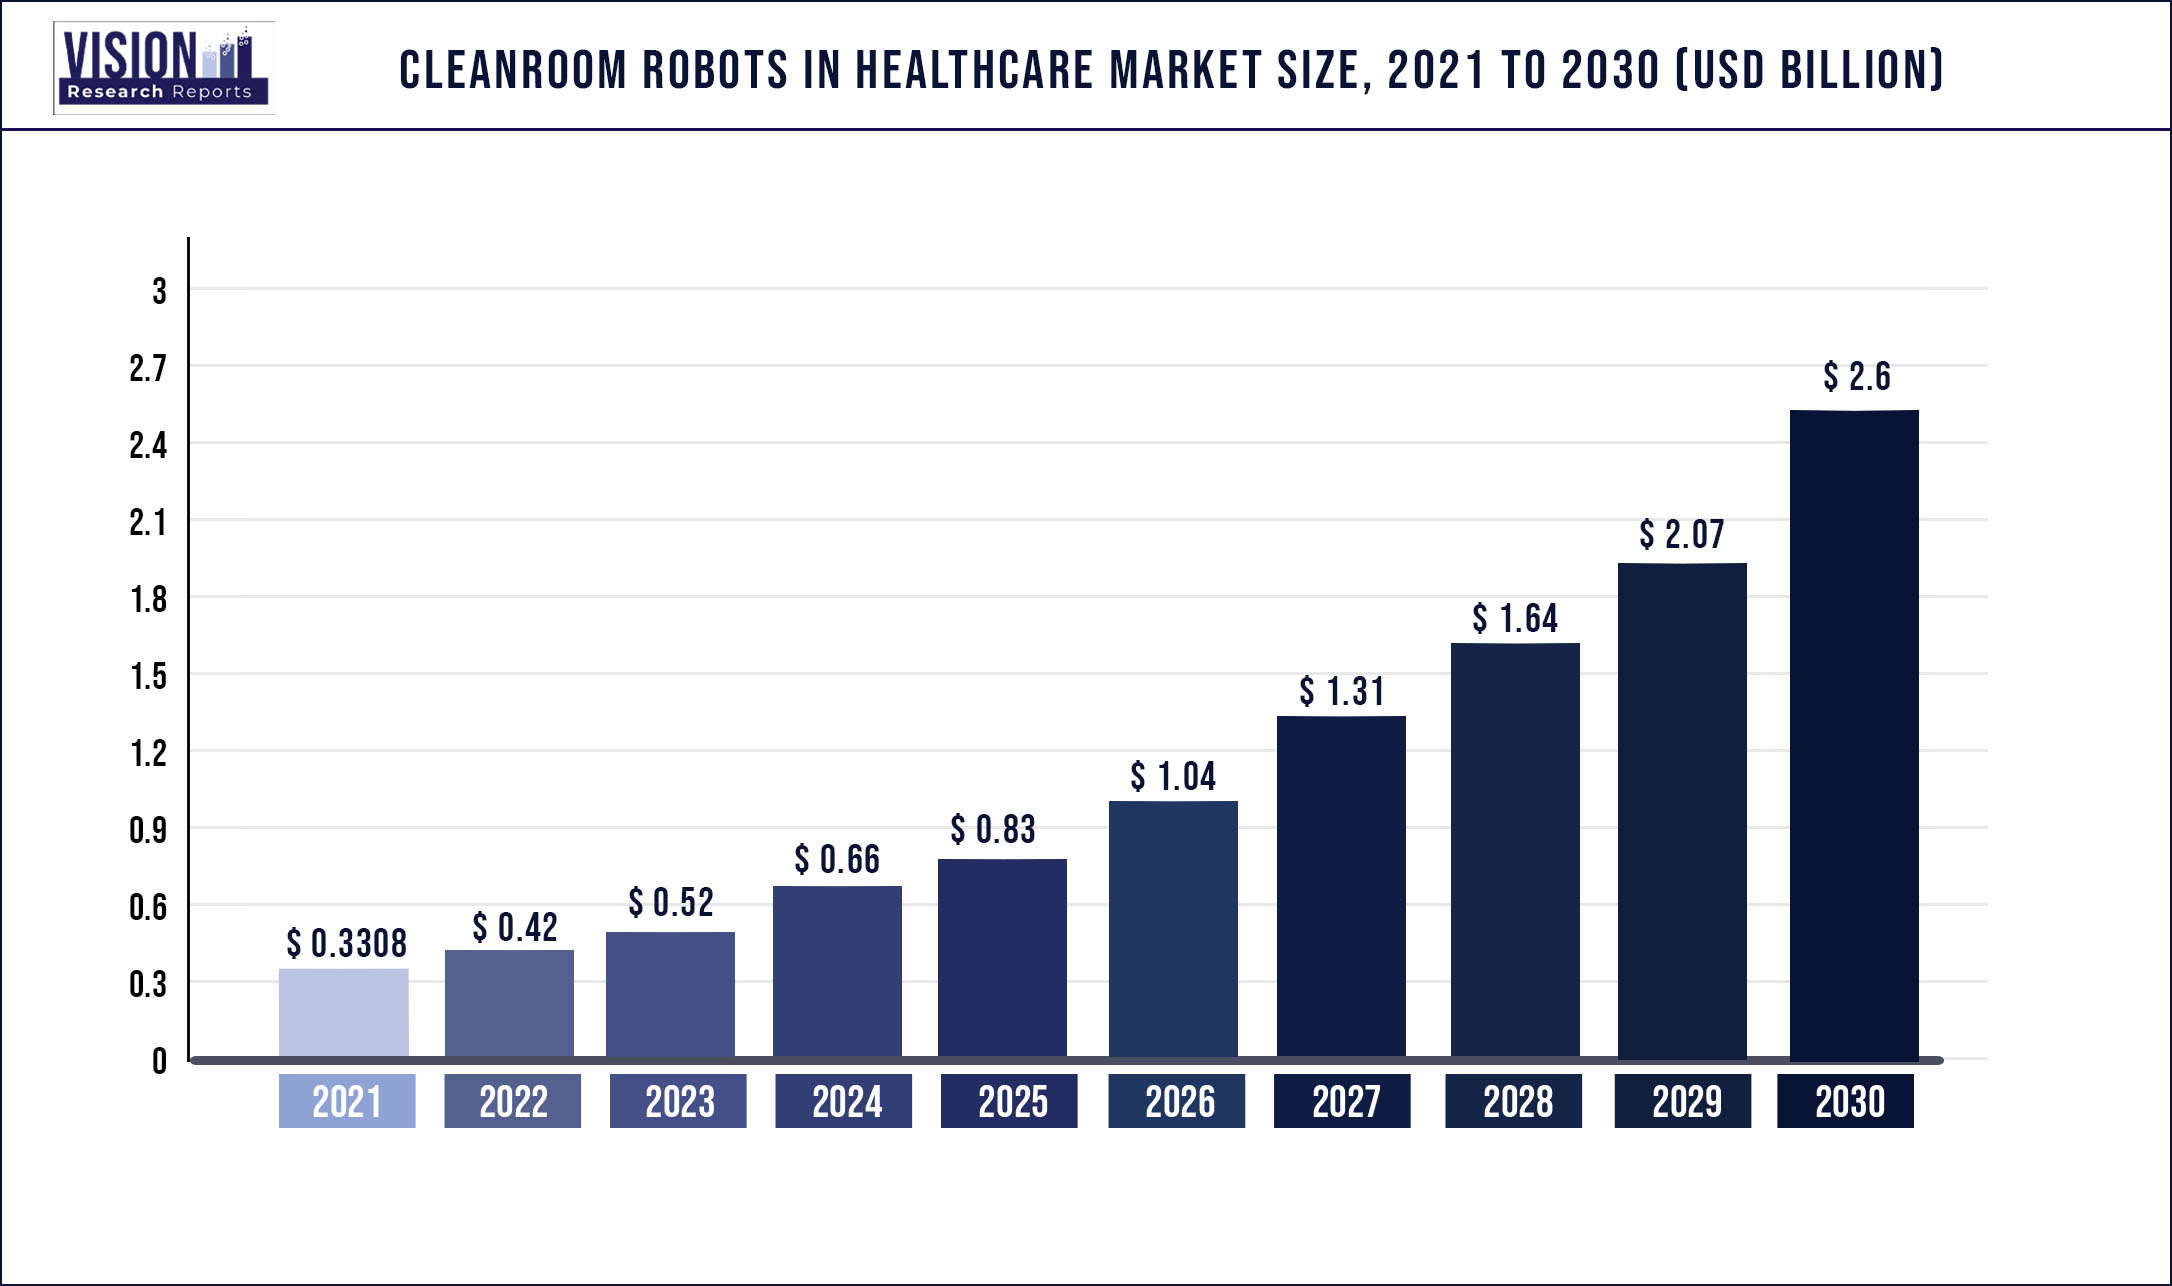 Cleanroom Robots in Healthcare Market Size 2021 to 2030